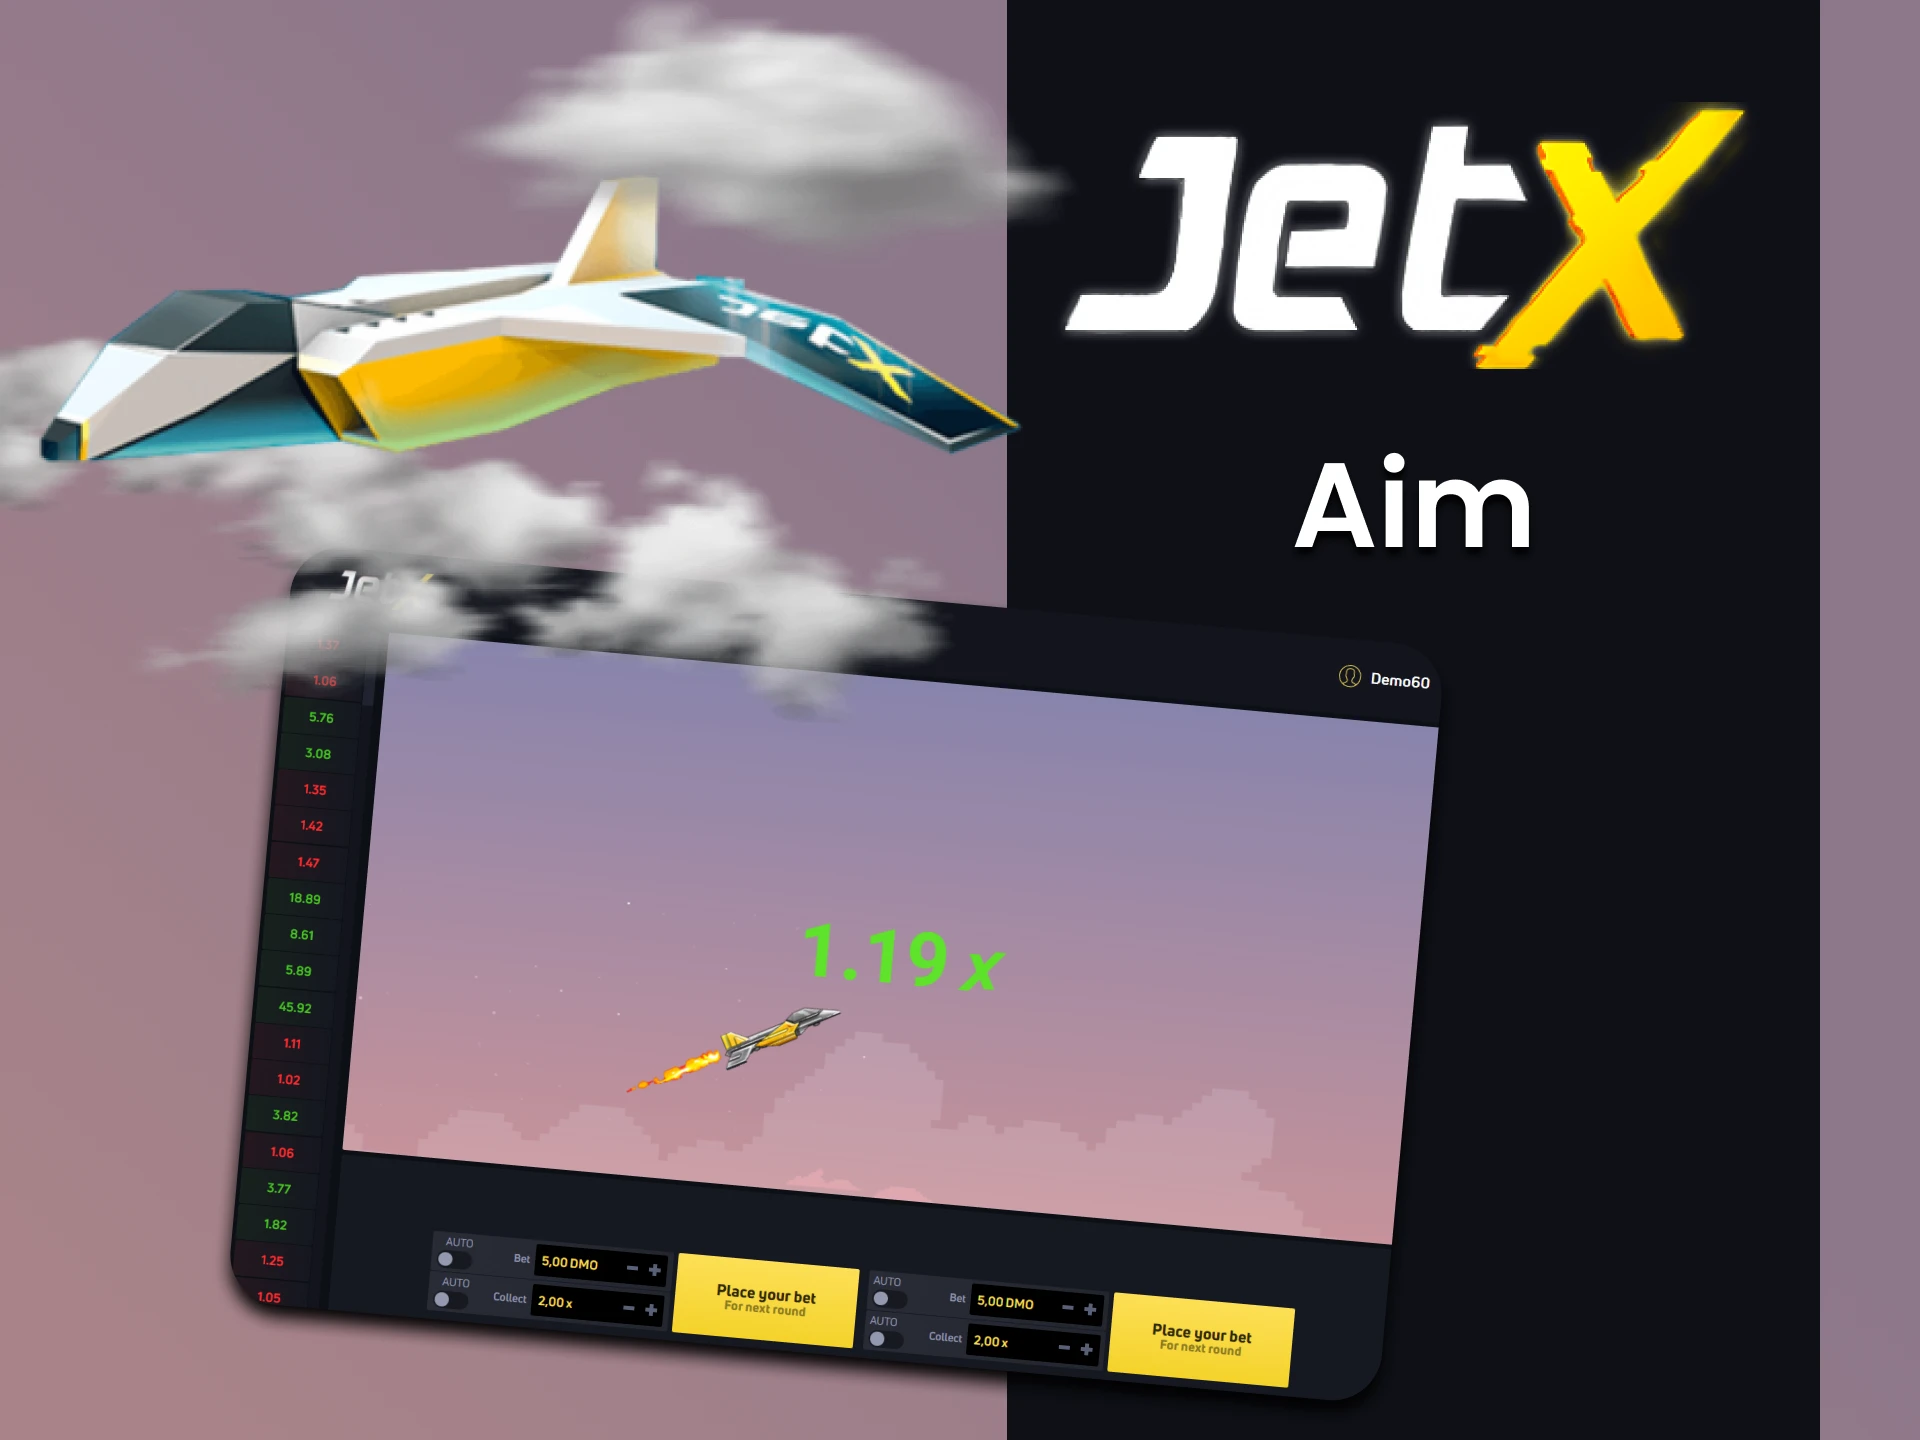 We will talk about the main goal of the JetX game.